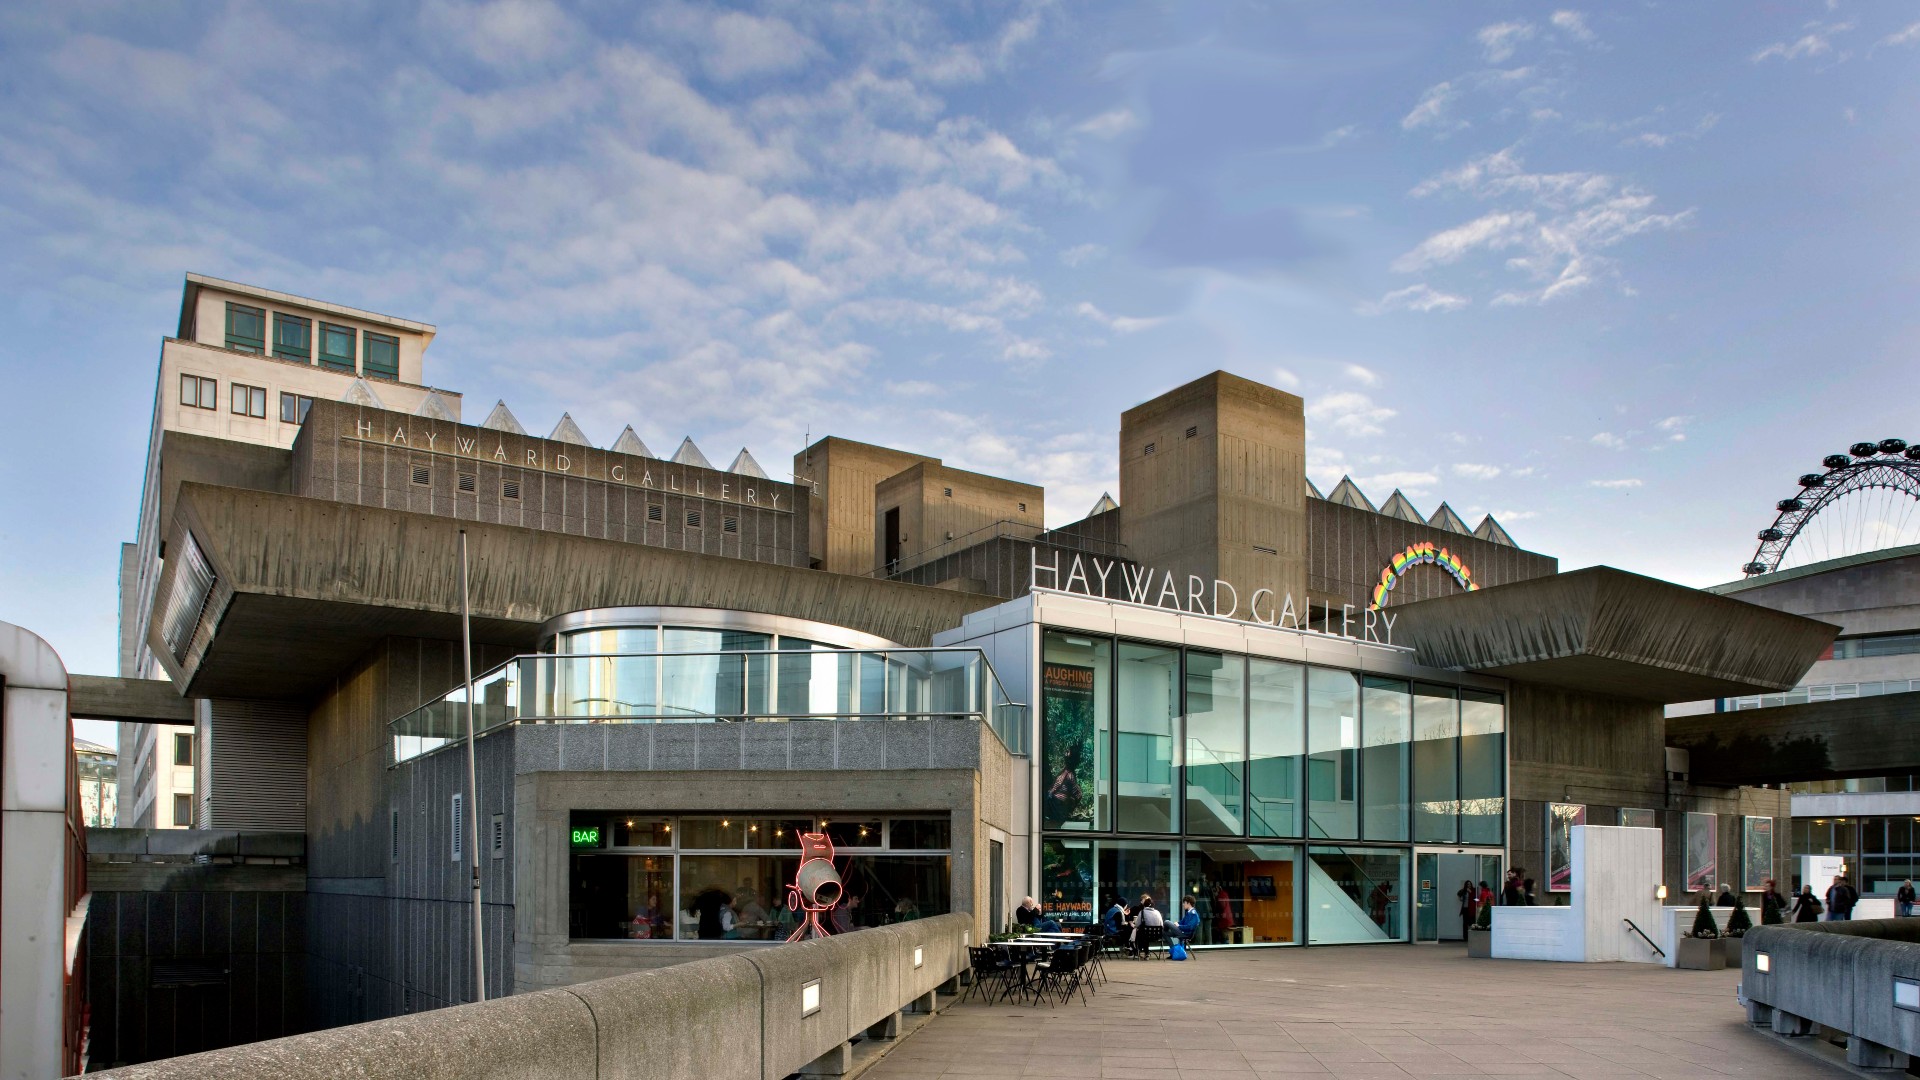 The Southbank Centre's Hayward Gallery on a bright day, with some people sitting at the desks in front of the building.